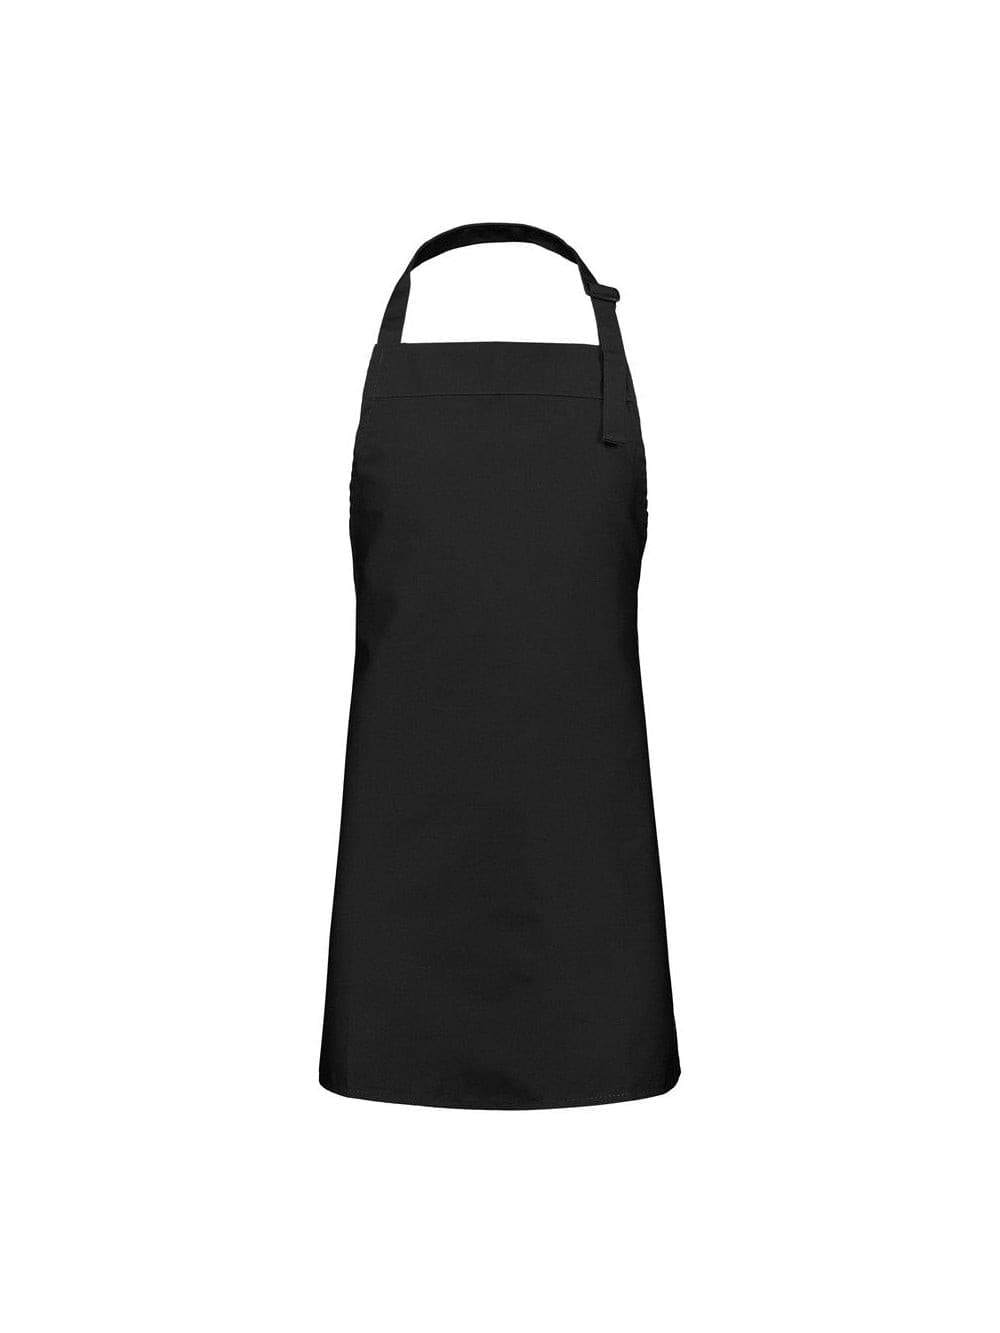 Bib Apron Kids Black by The Little Chef Collection -  ChefsCotton